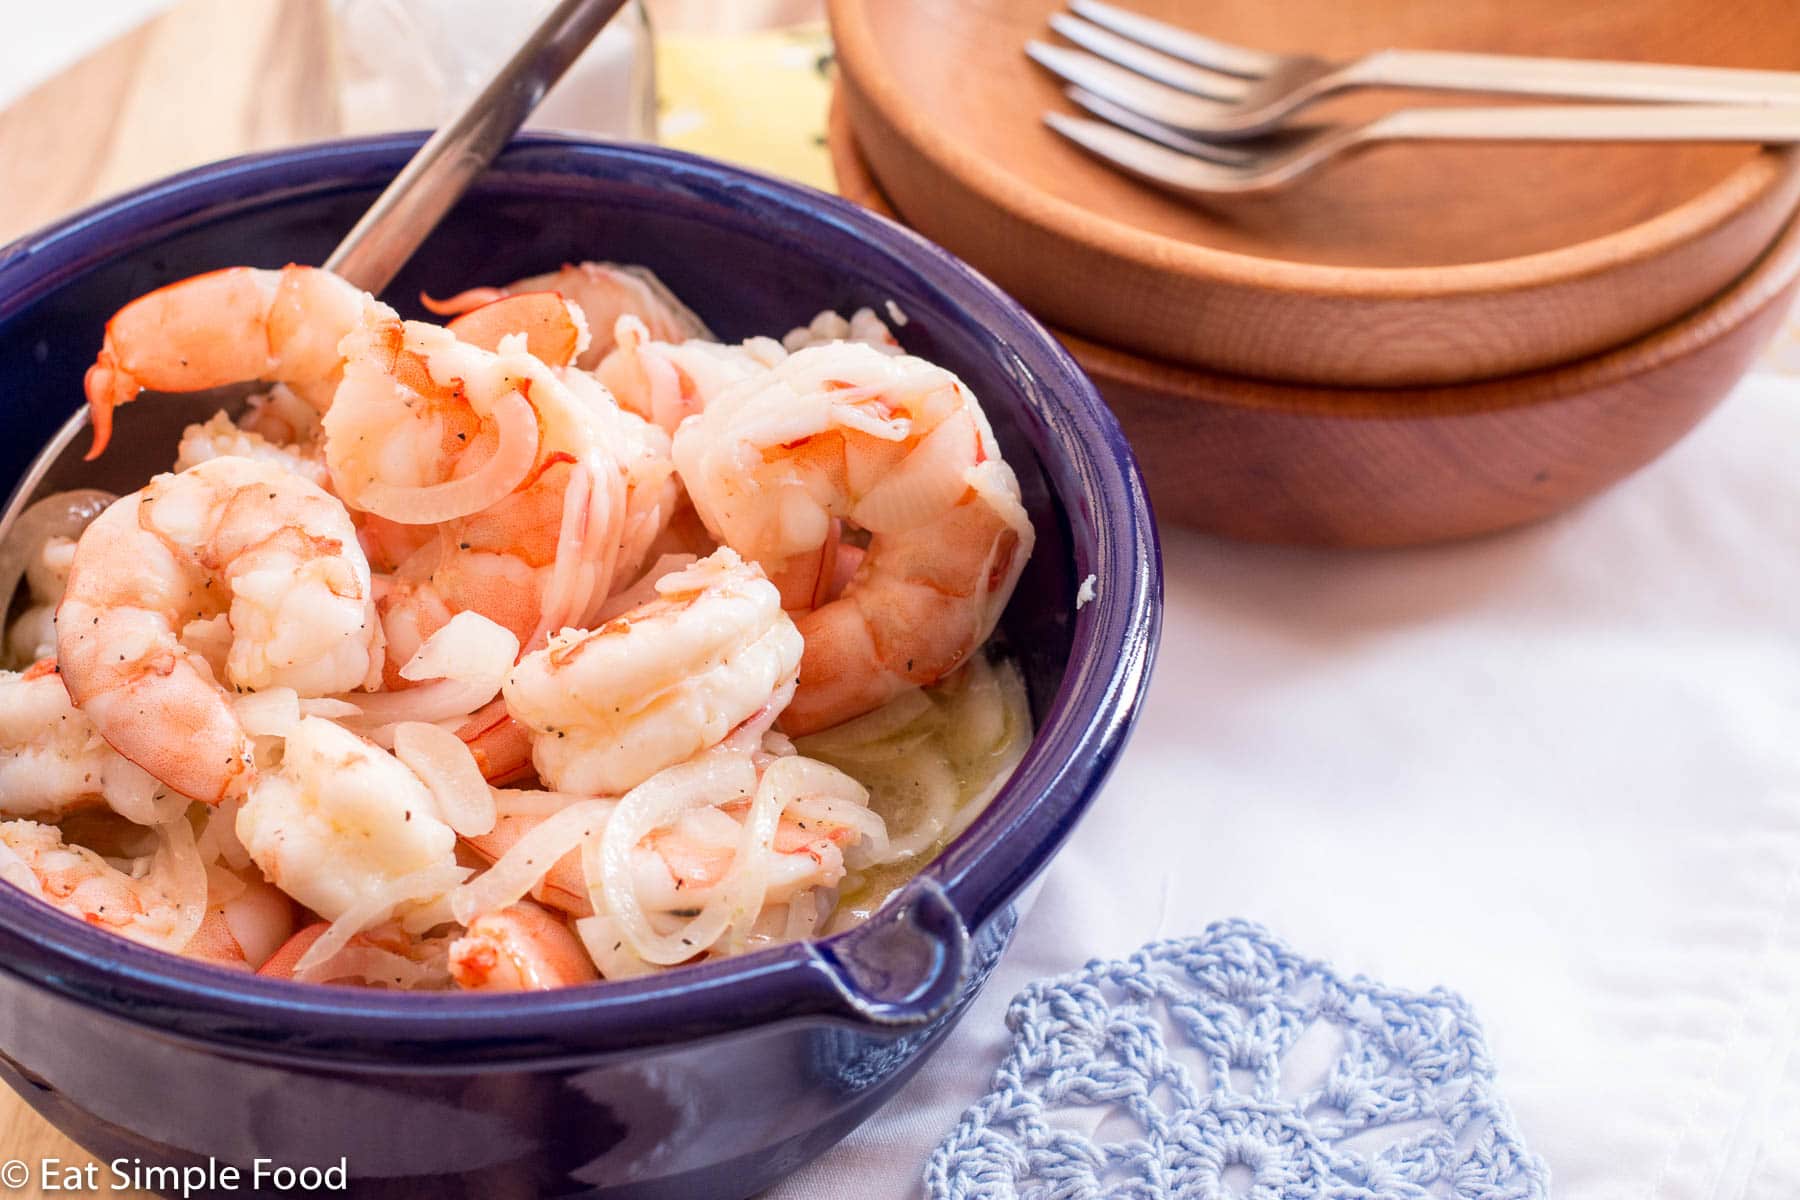 Cooked Pickled Shrimp with thin sliced onions In a blue bowl with a spoon sticking out. 2 wood bowls with small forks on the side.